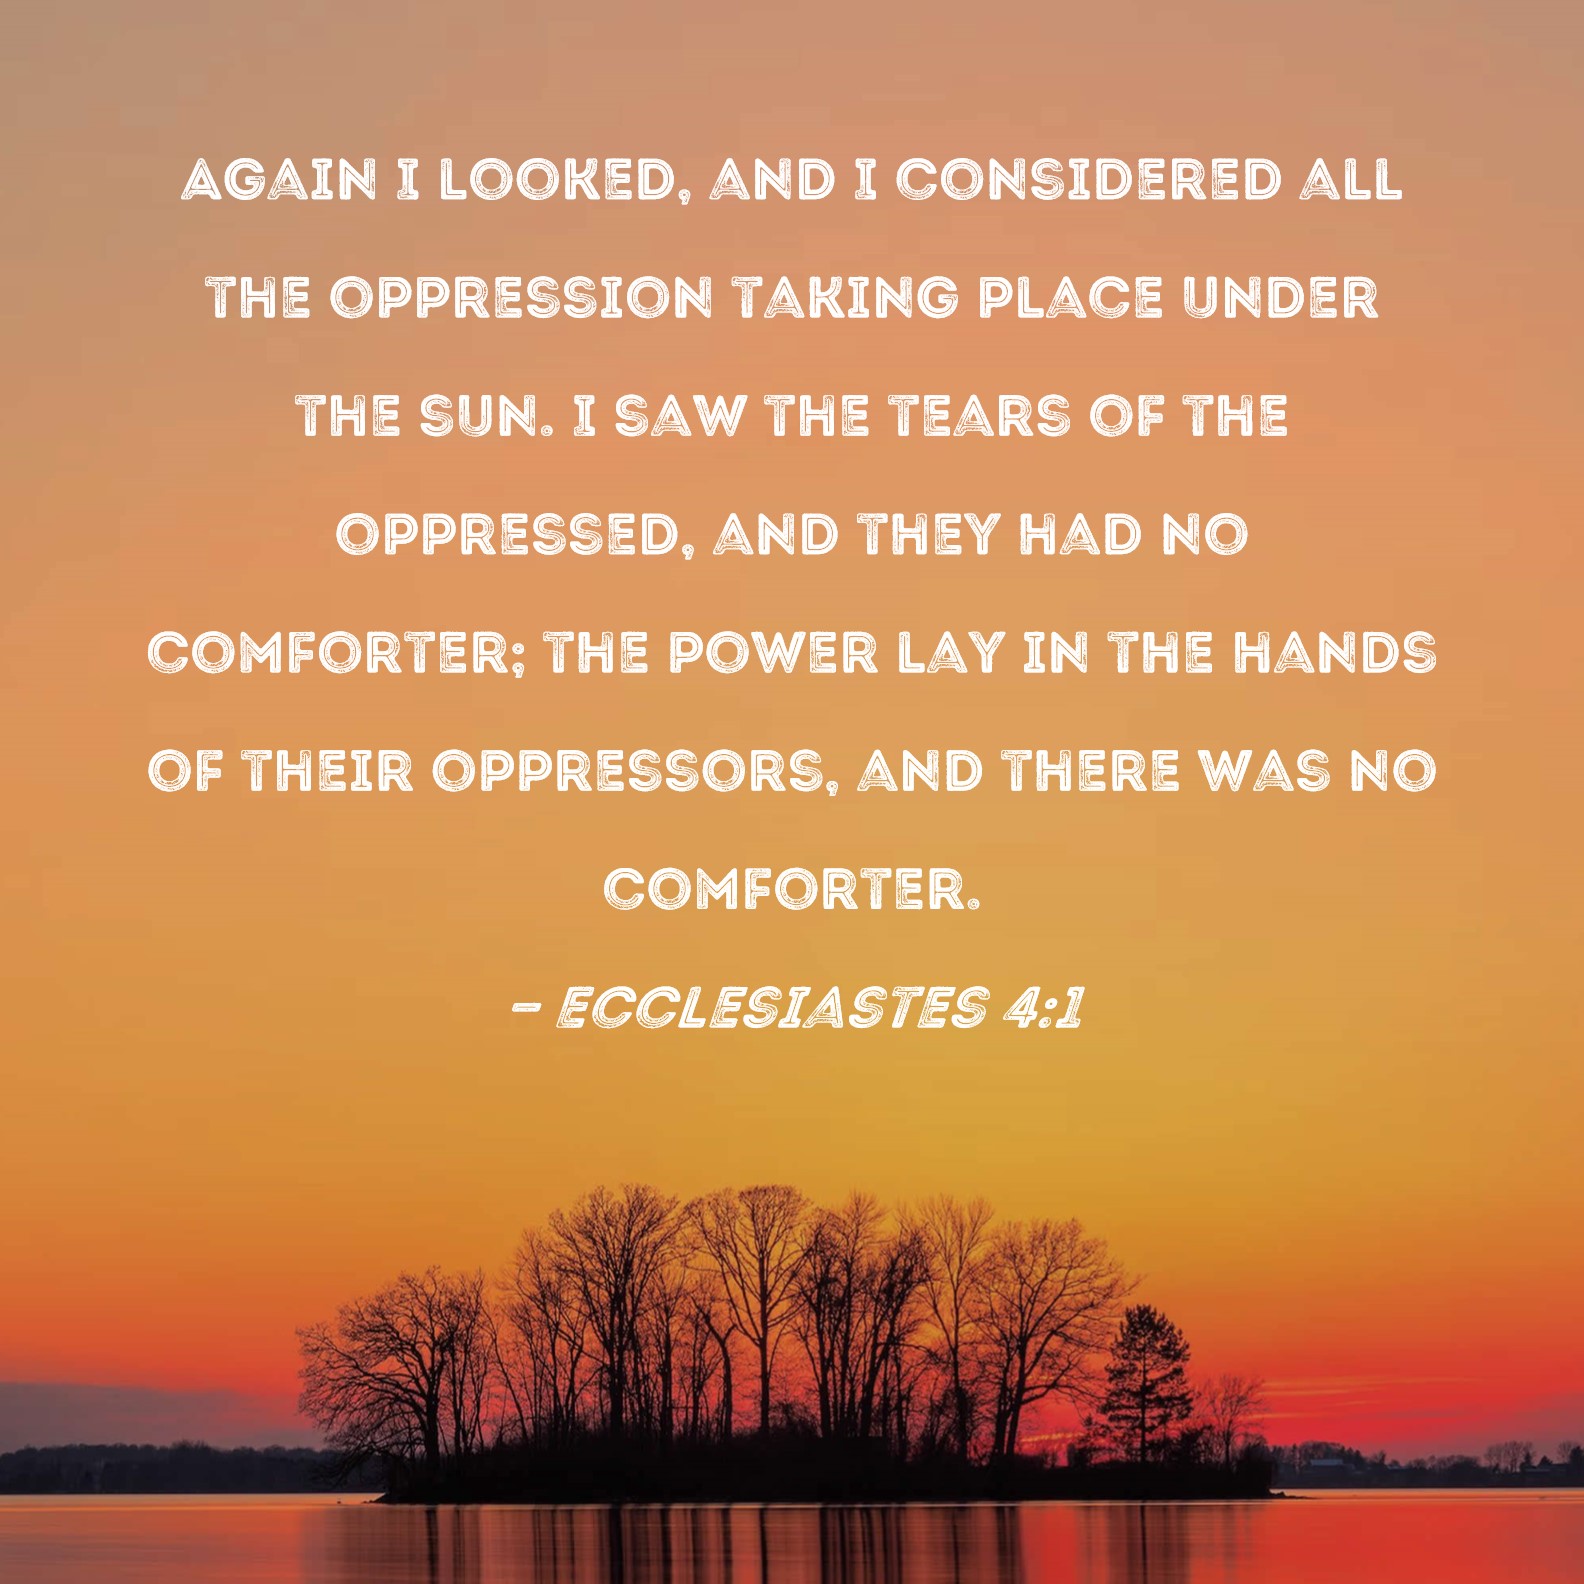 4] Oppressed because Weak Body but Has Power of God 